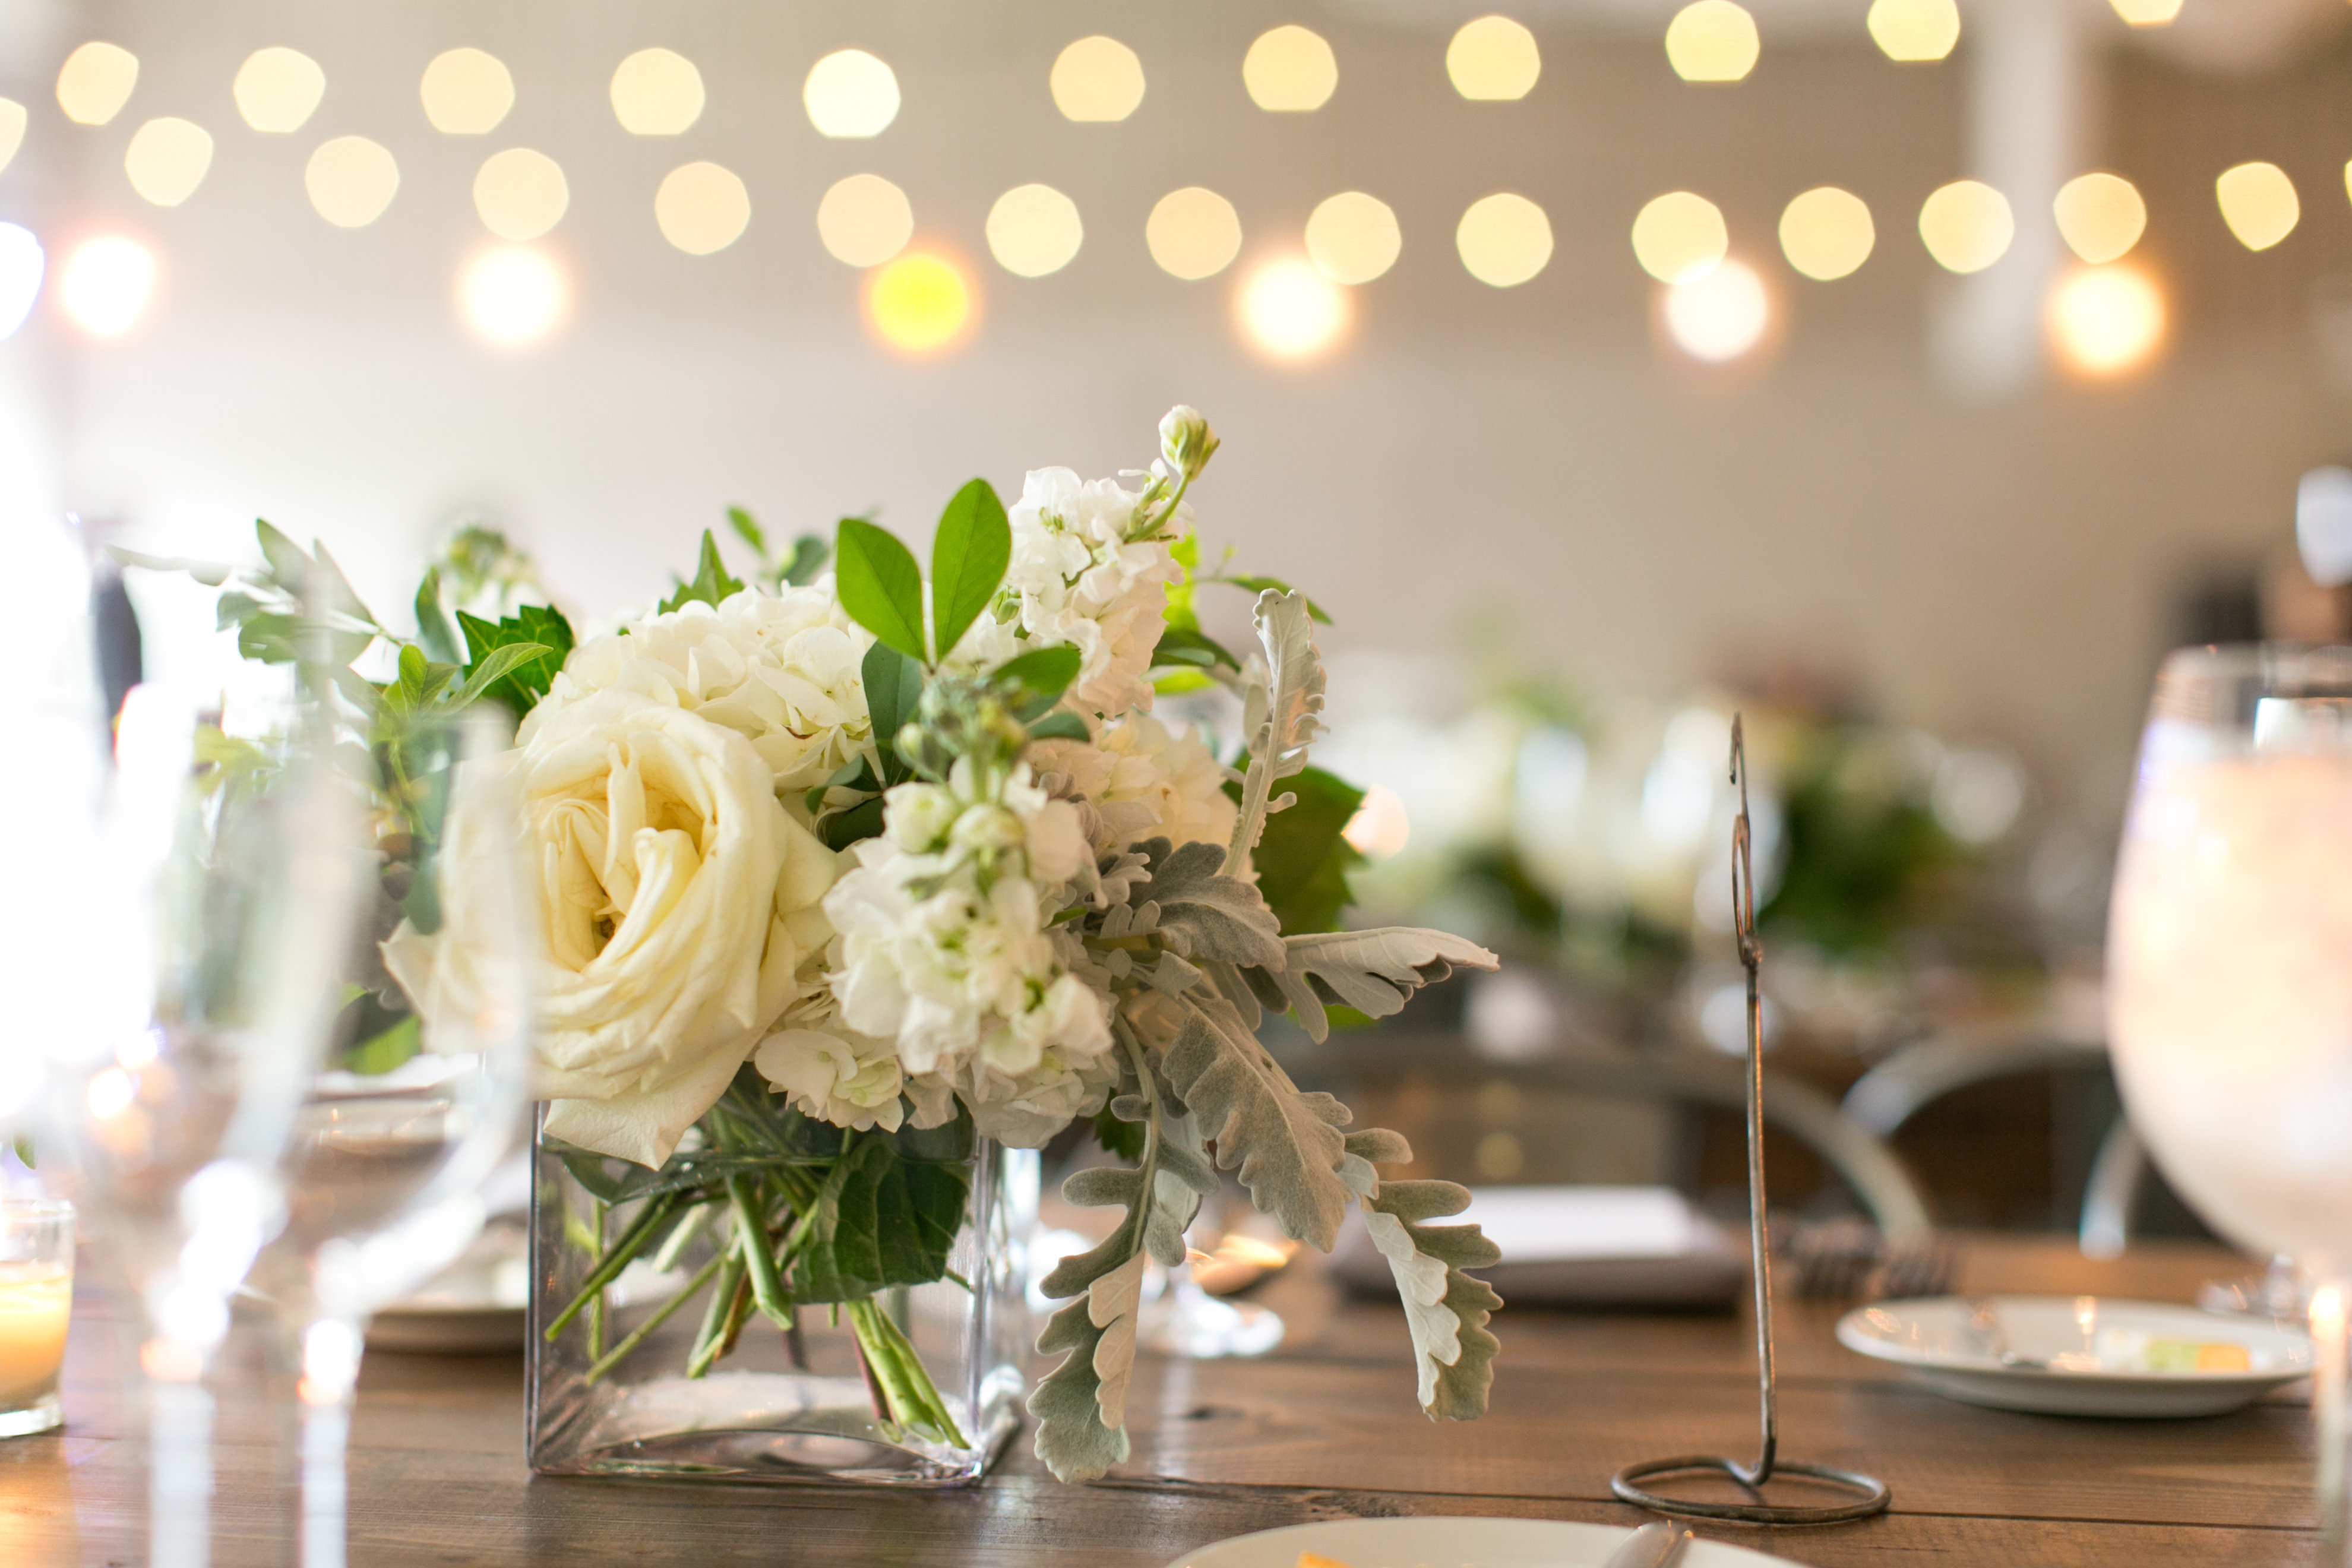 Ivory wedding reception bouquets with garden roses at Ignite Glass Studio Chicago.